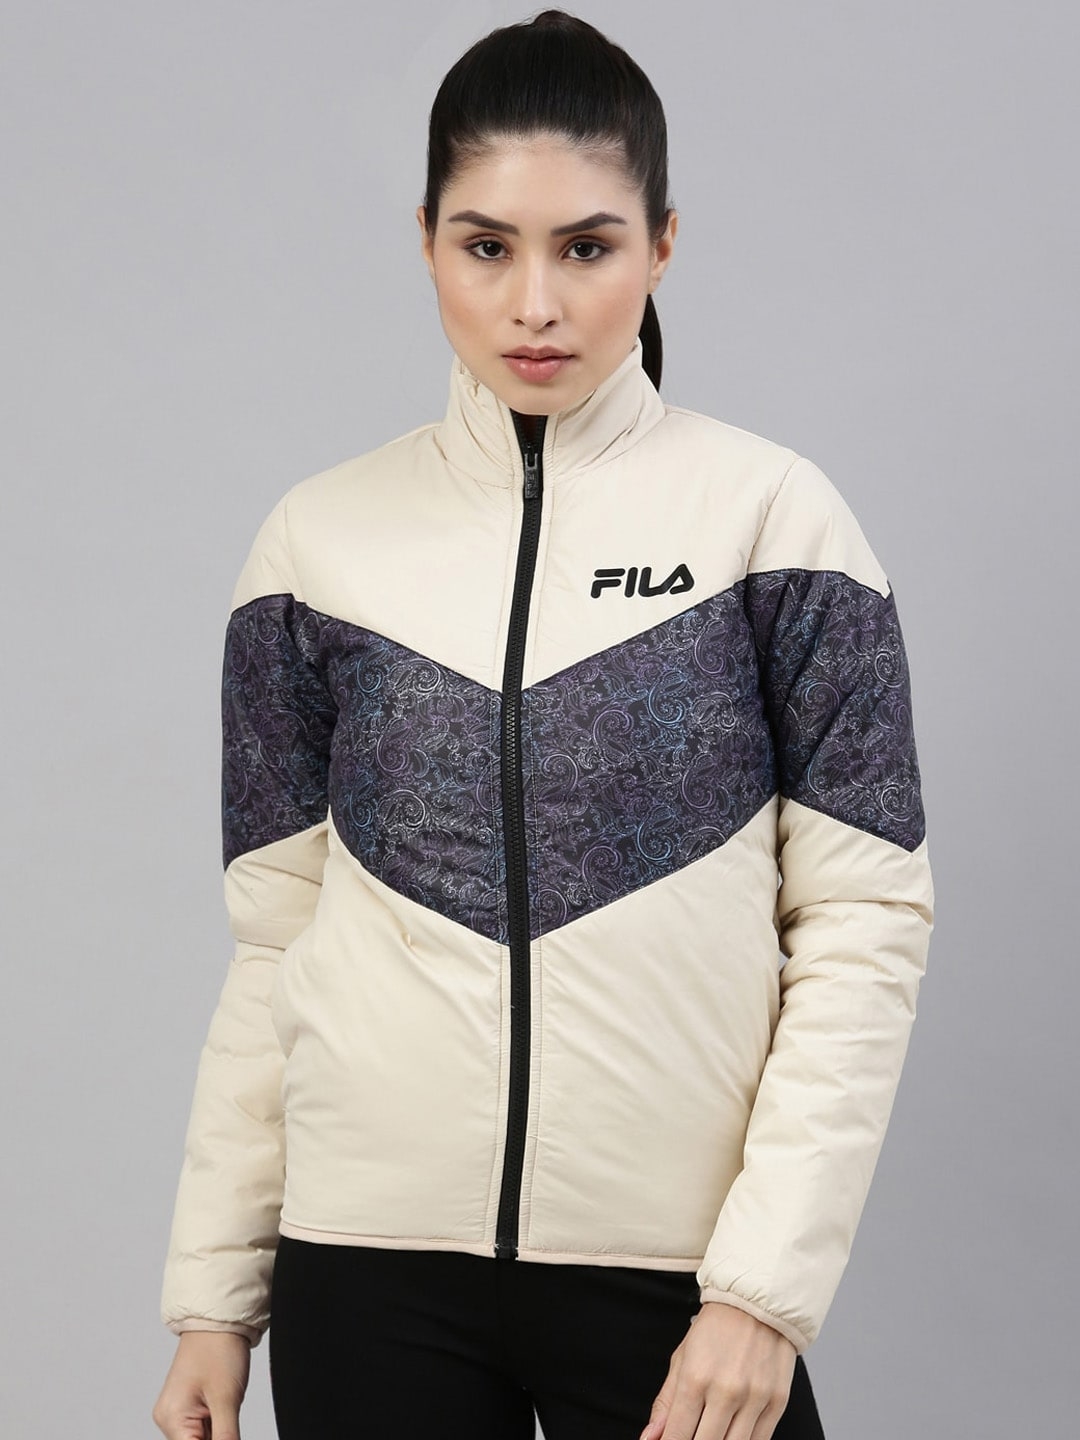 Women's White Polyester Activewear Jackets